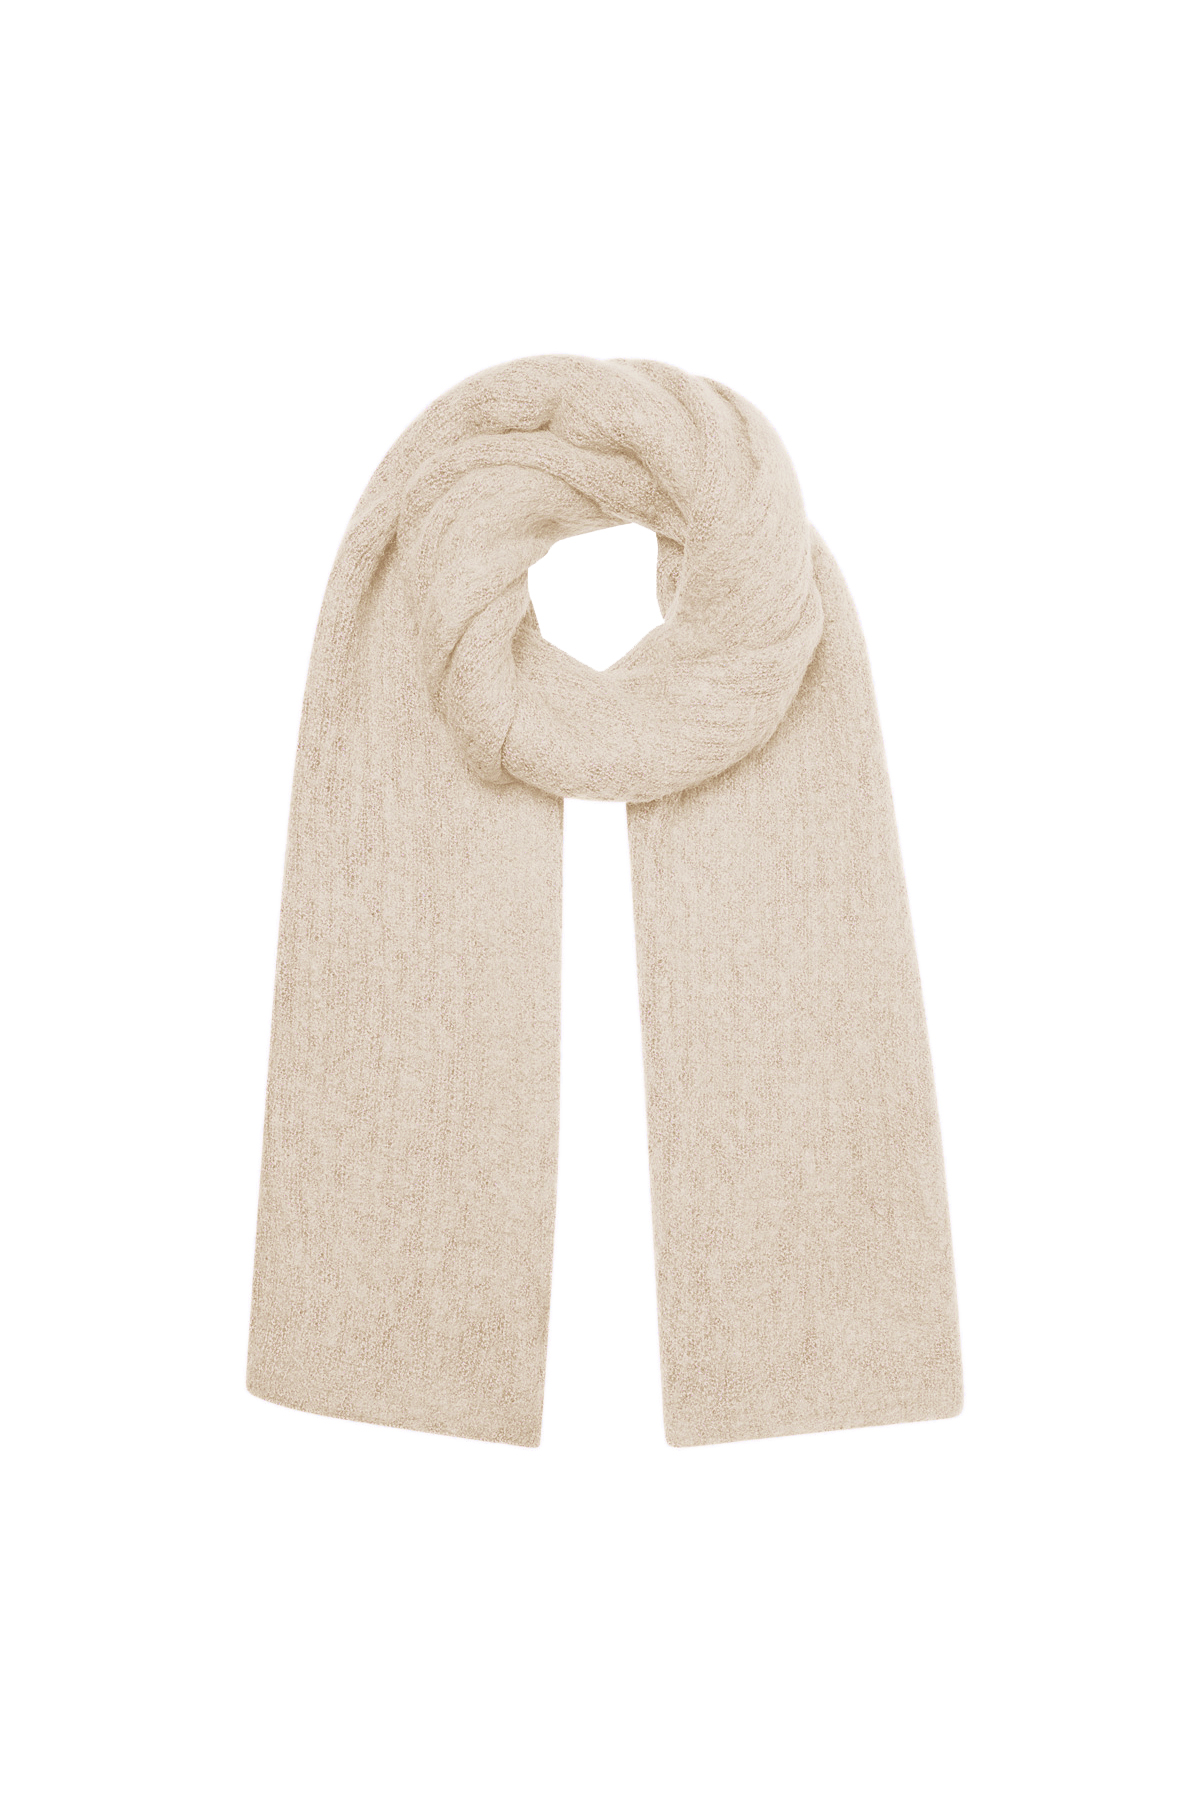 Scarf knitted plain - sand 